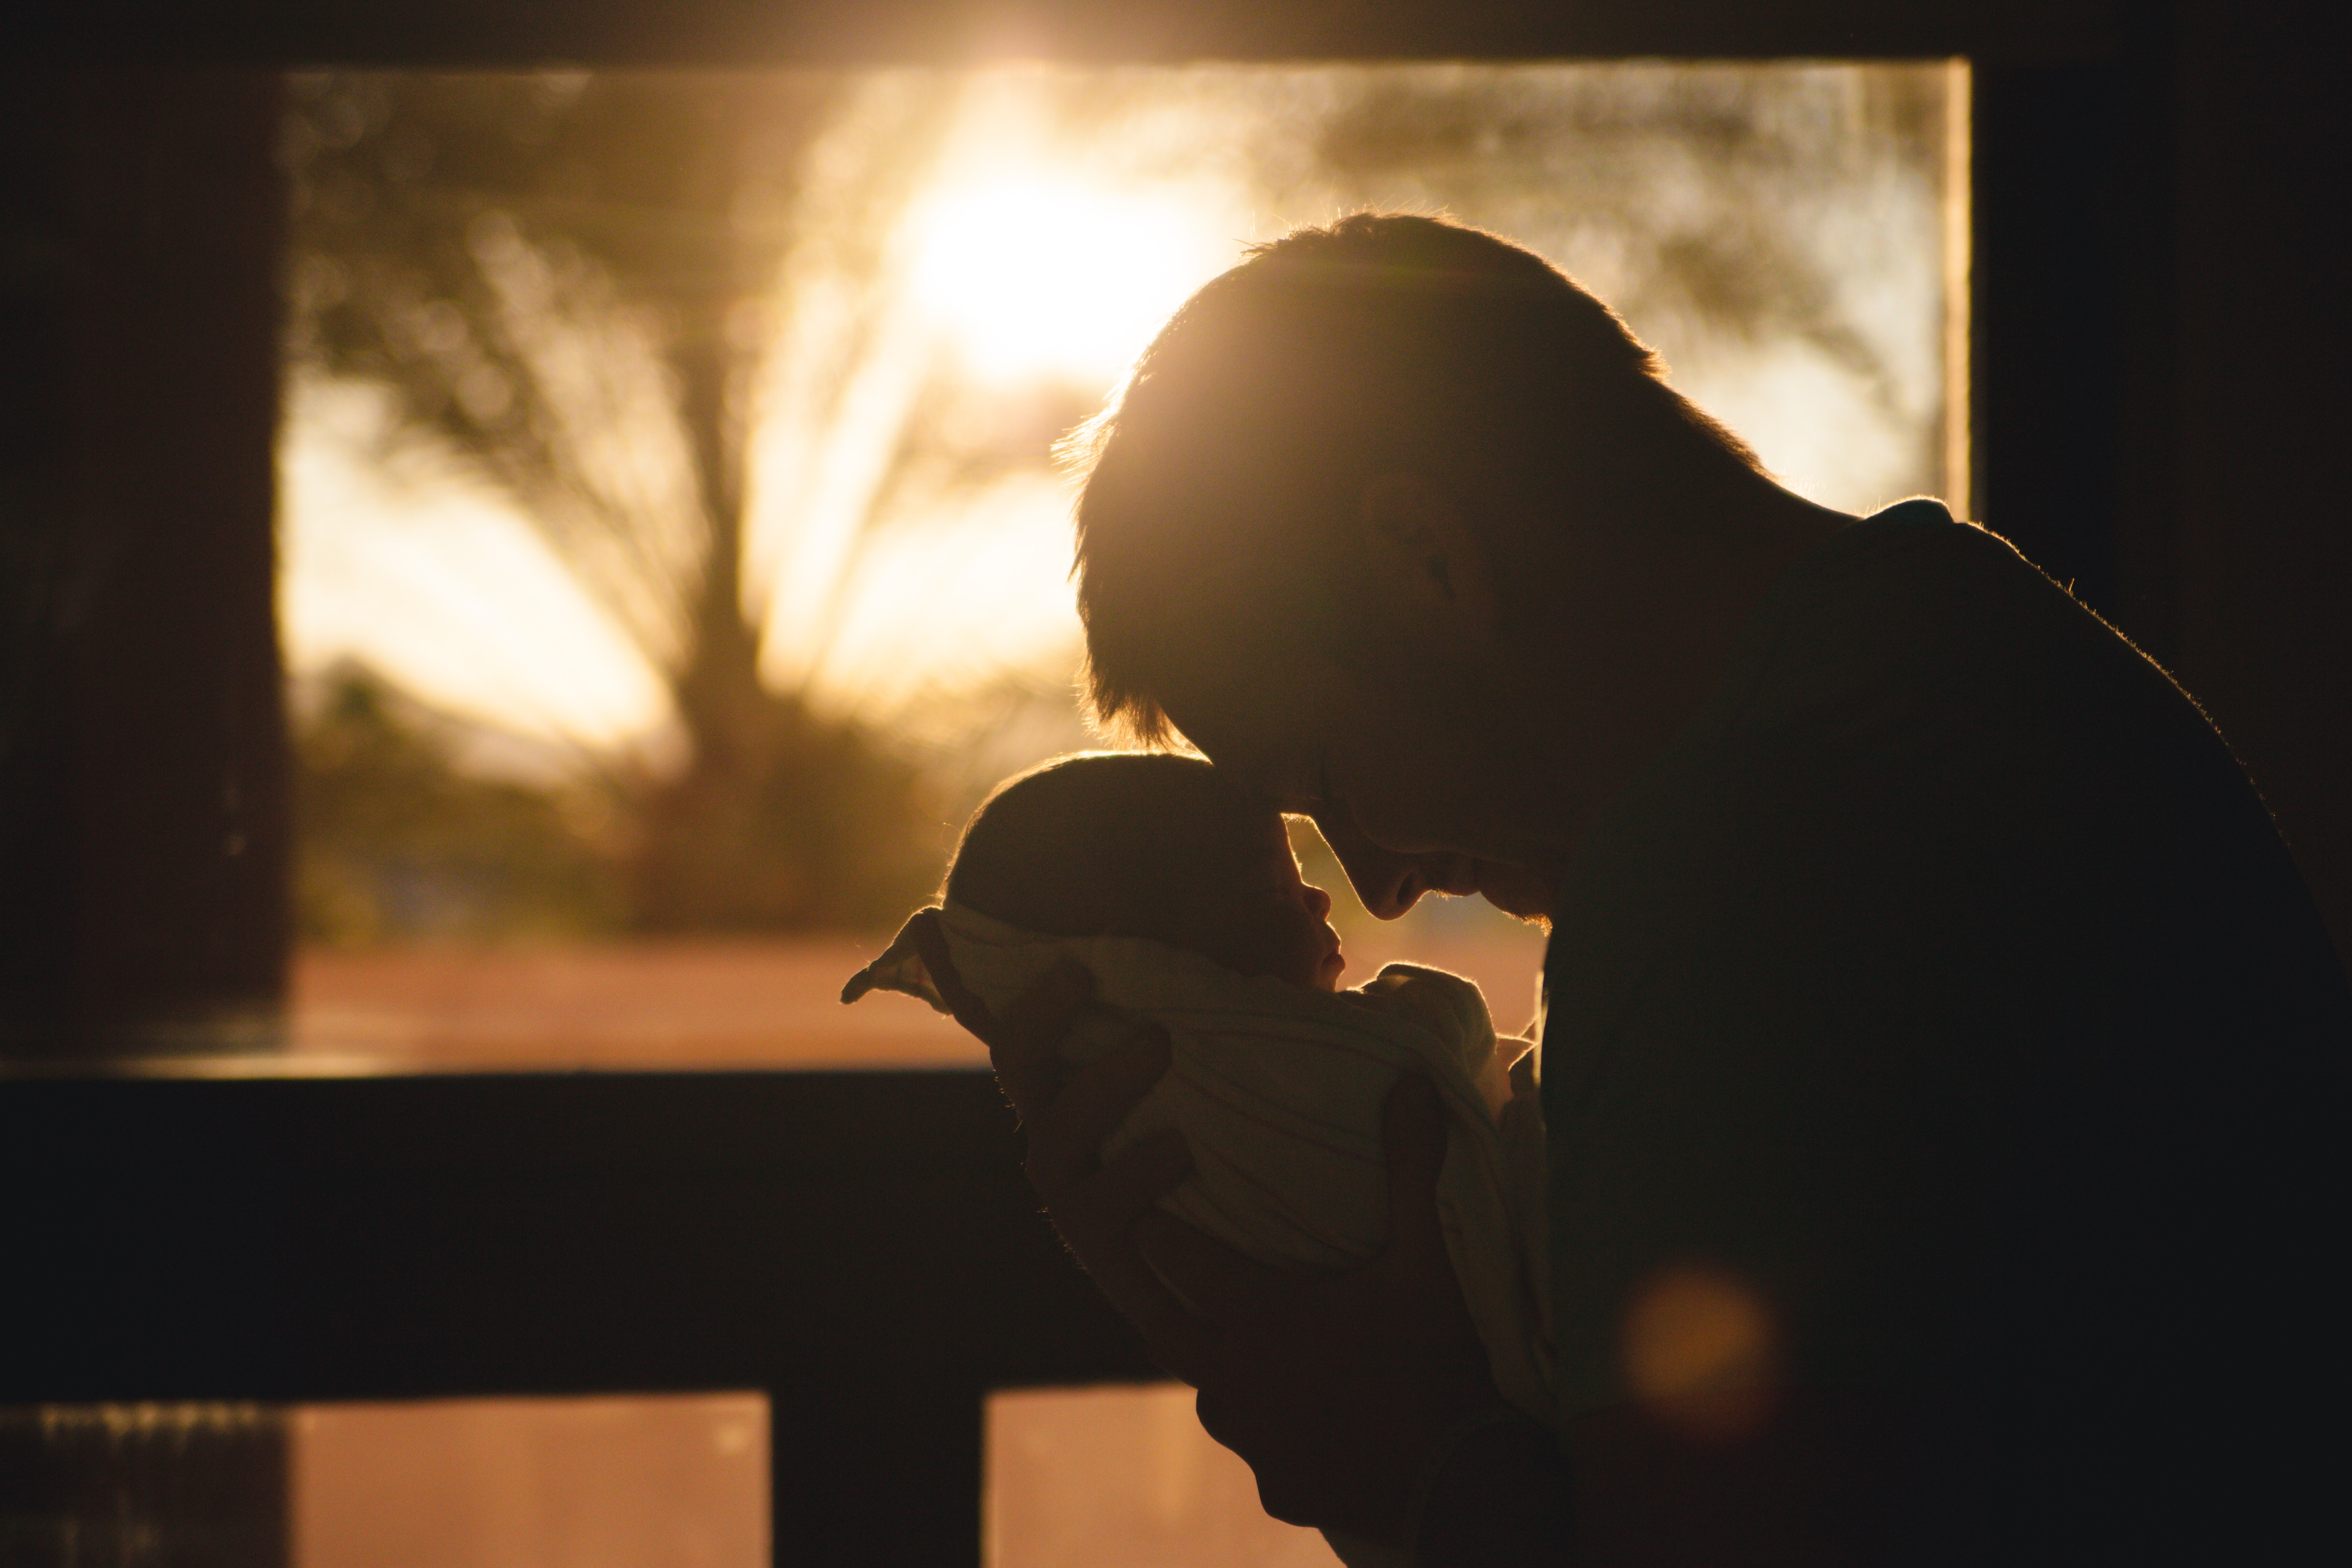 A man doting on a baby | Source: Pexels